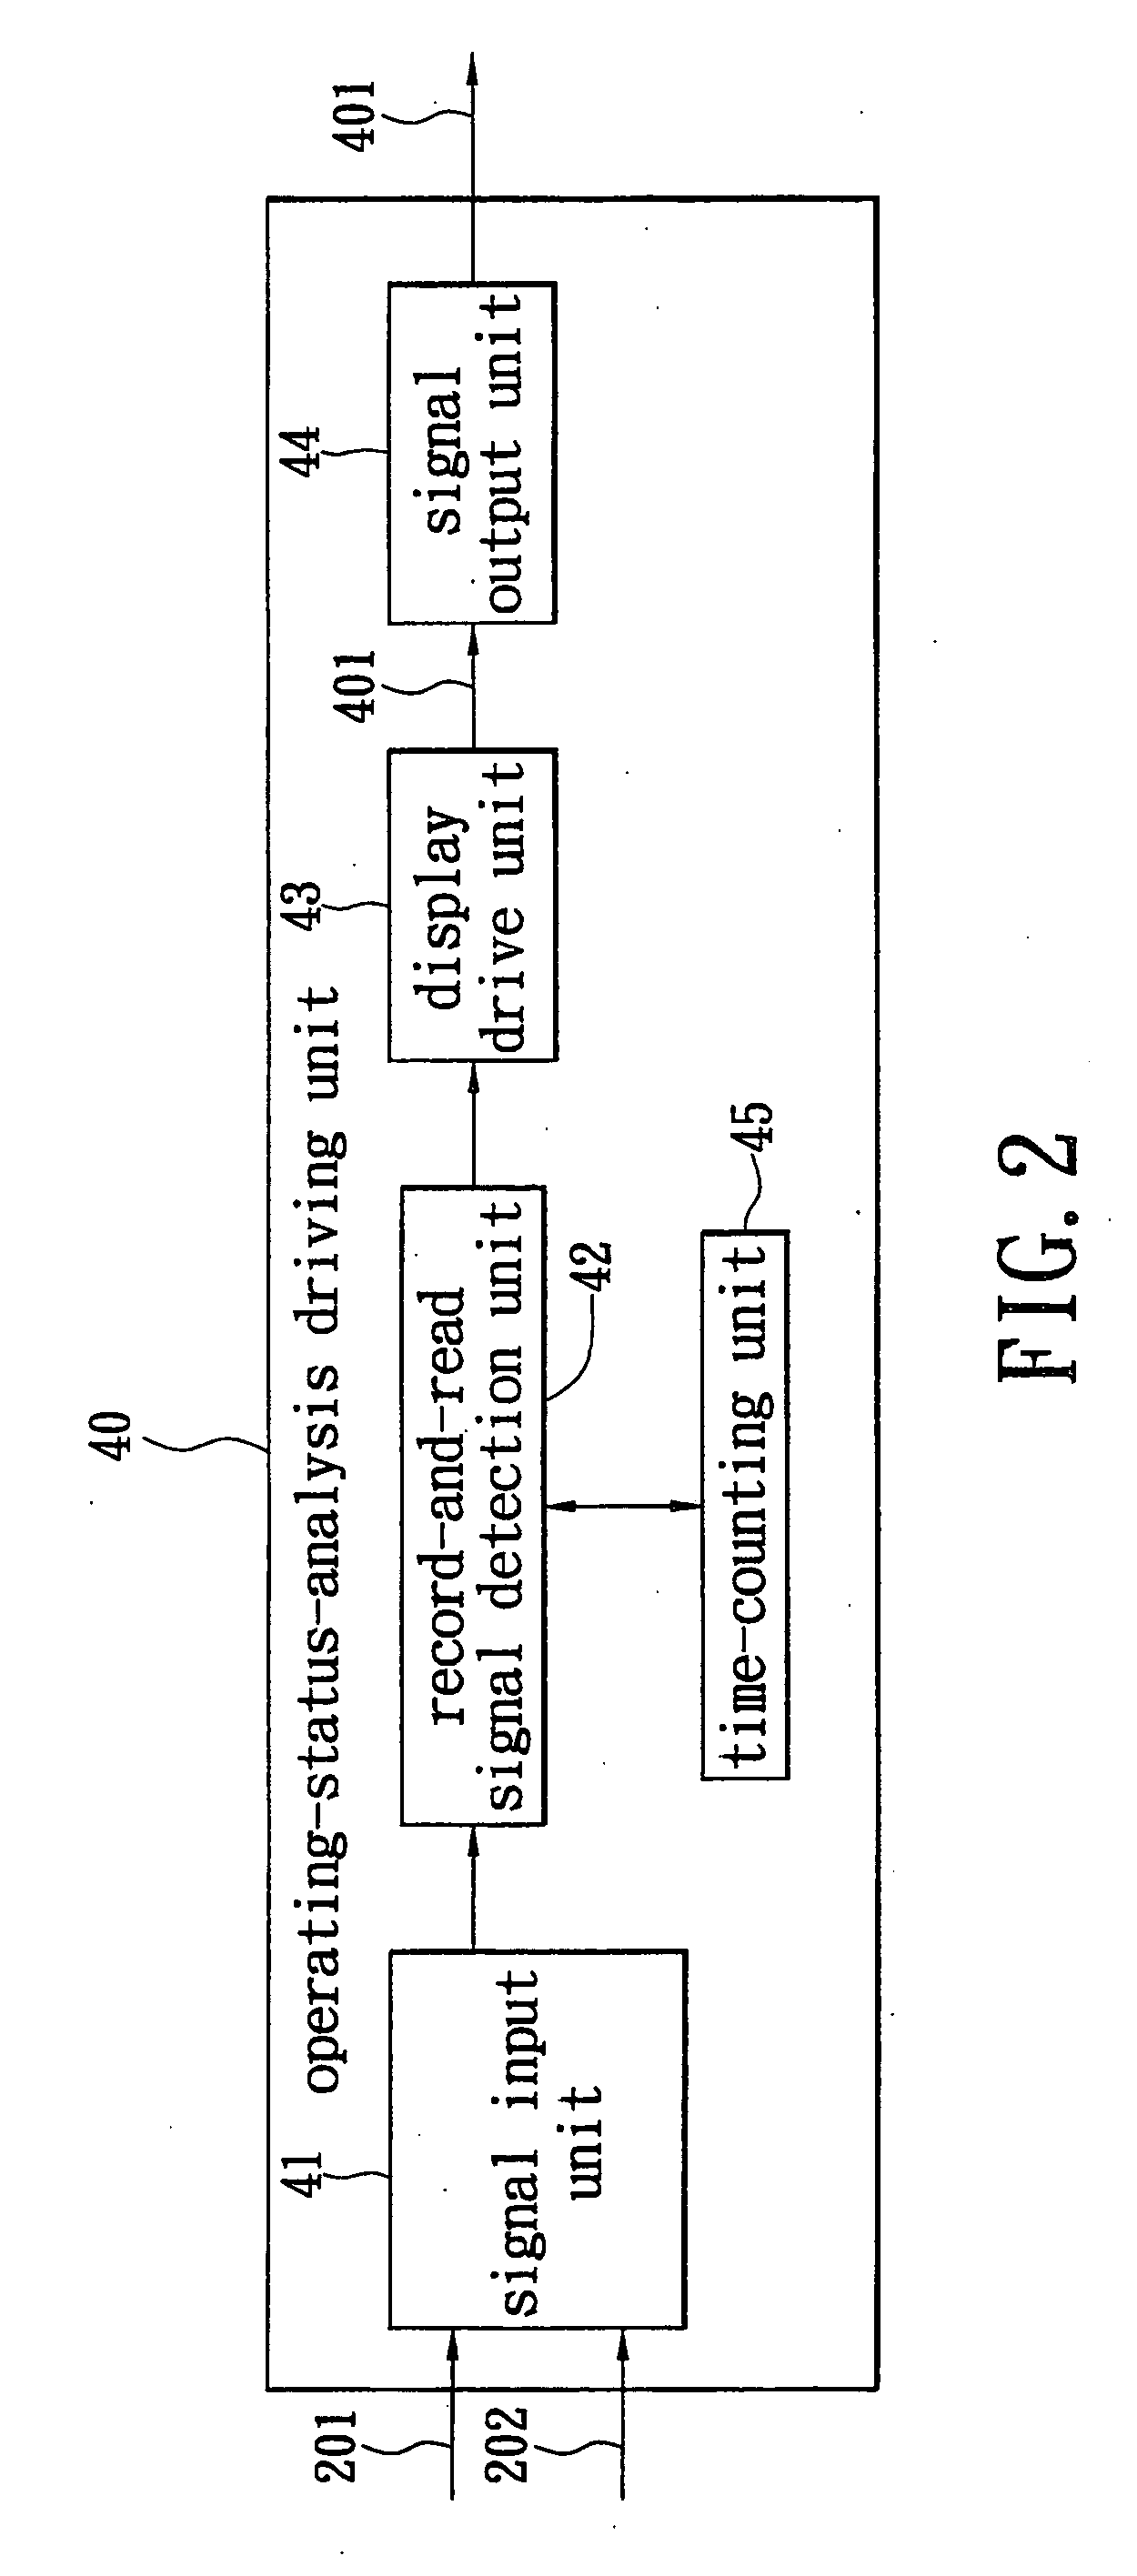 Portable storage device with operating status display